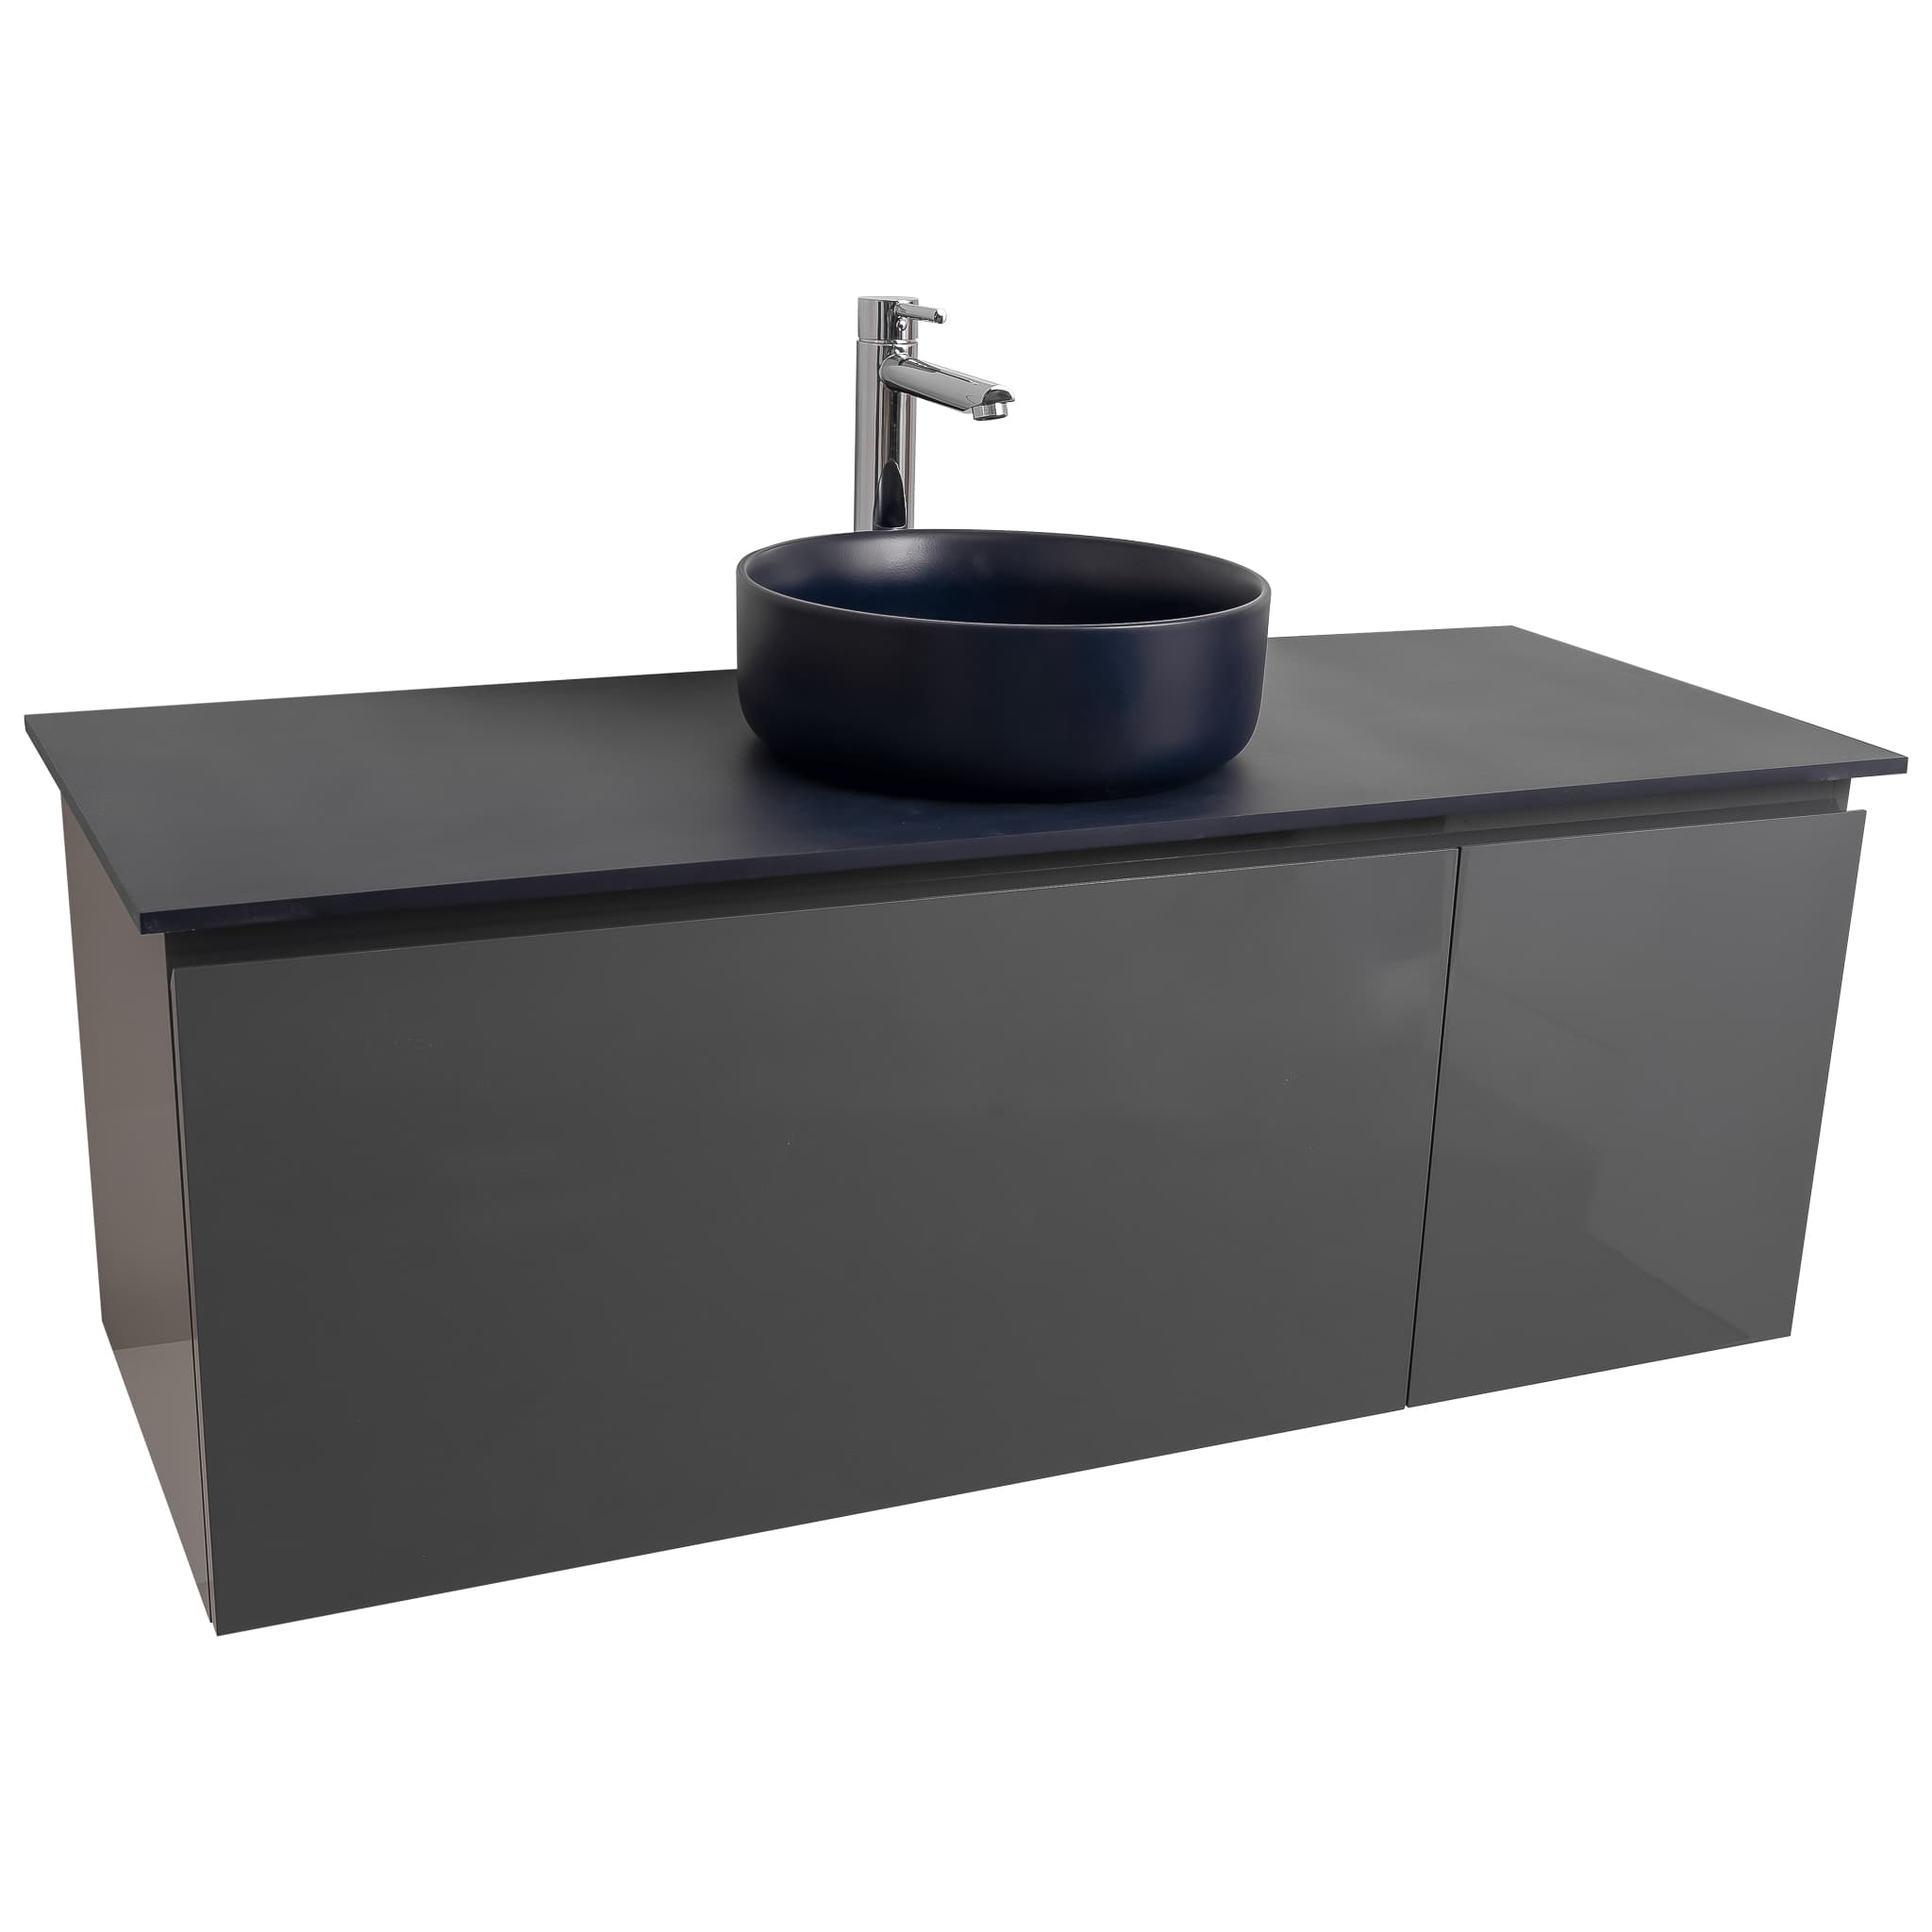 Venice 47.5 Anthracite High Gloss Cabinet, Ares Navy Blue Top And Ares Navy Blue Ceramic Basin, Wall Mounted Modern Vanity Set